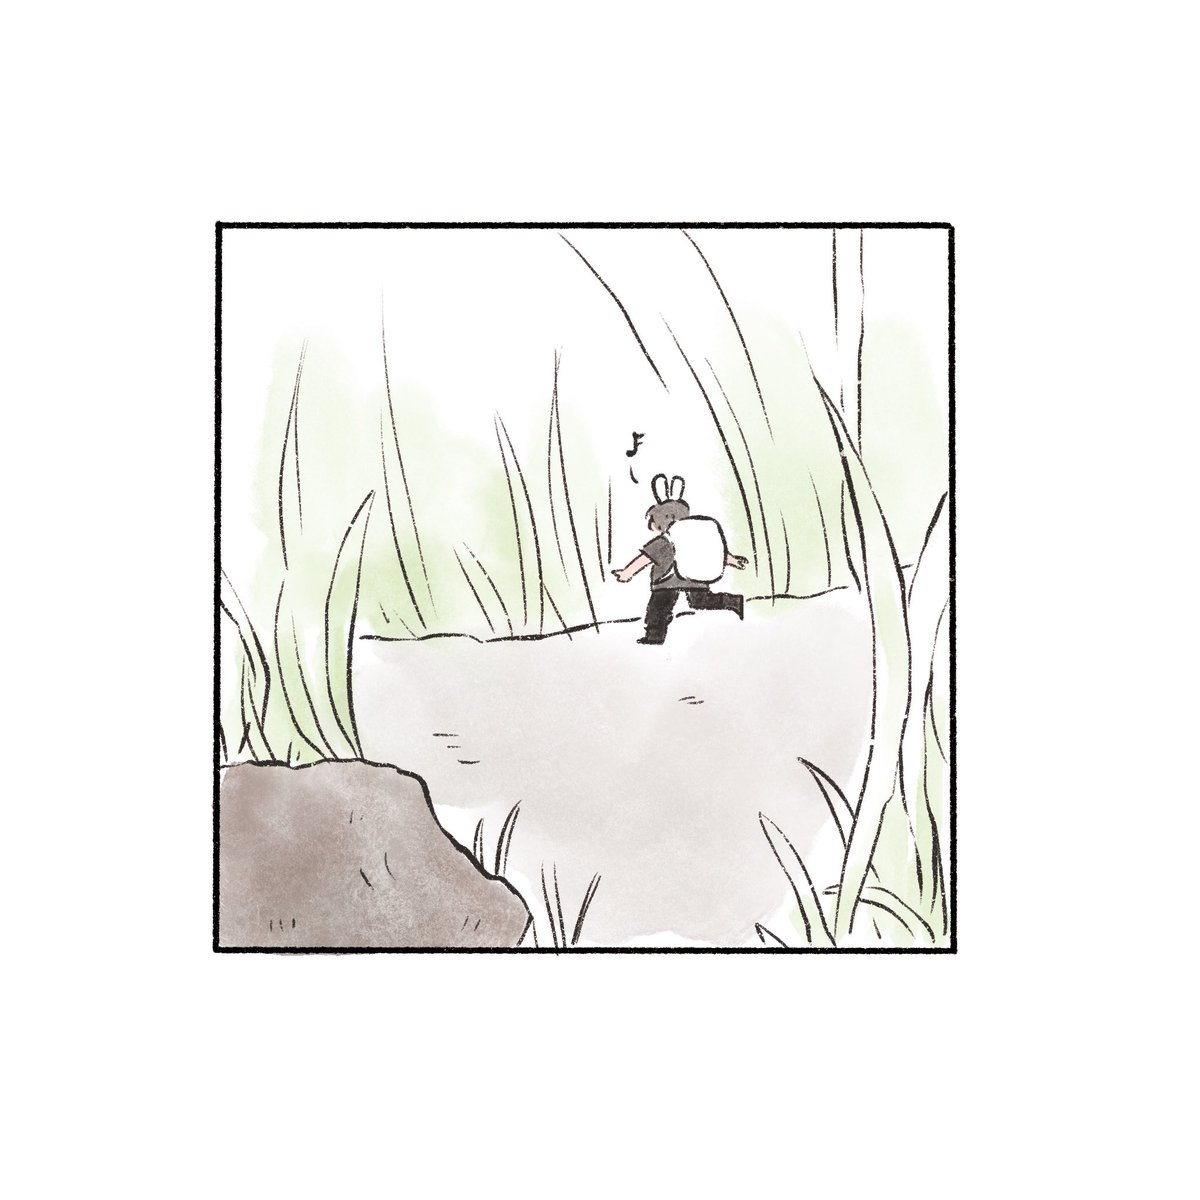 *You have entered Koo’s dream*You spot Bun-koo skipping through the tall grass. He spots little talking pebbles in the grass and picks them up. He doesn’t get far before a giant snail appears in front of him. This is Q, the Quest Snail who presents Koo with a game.